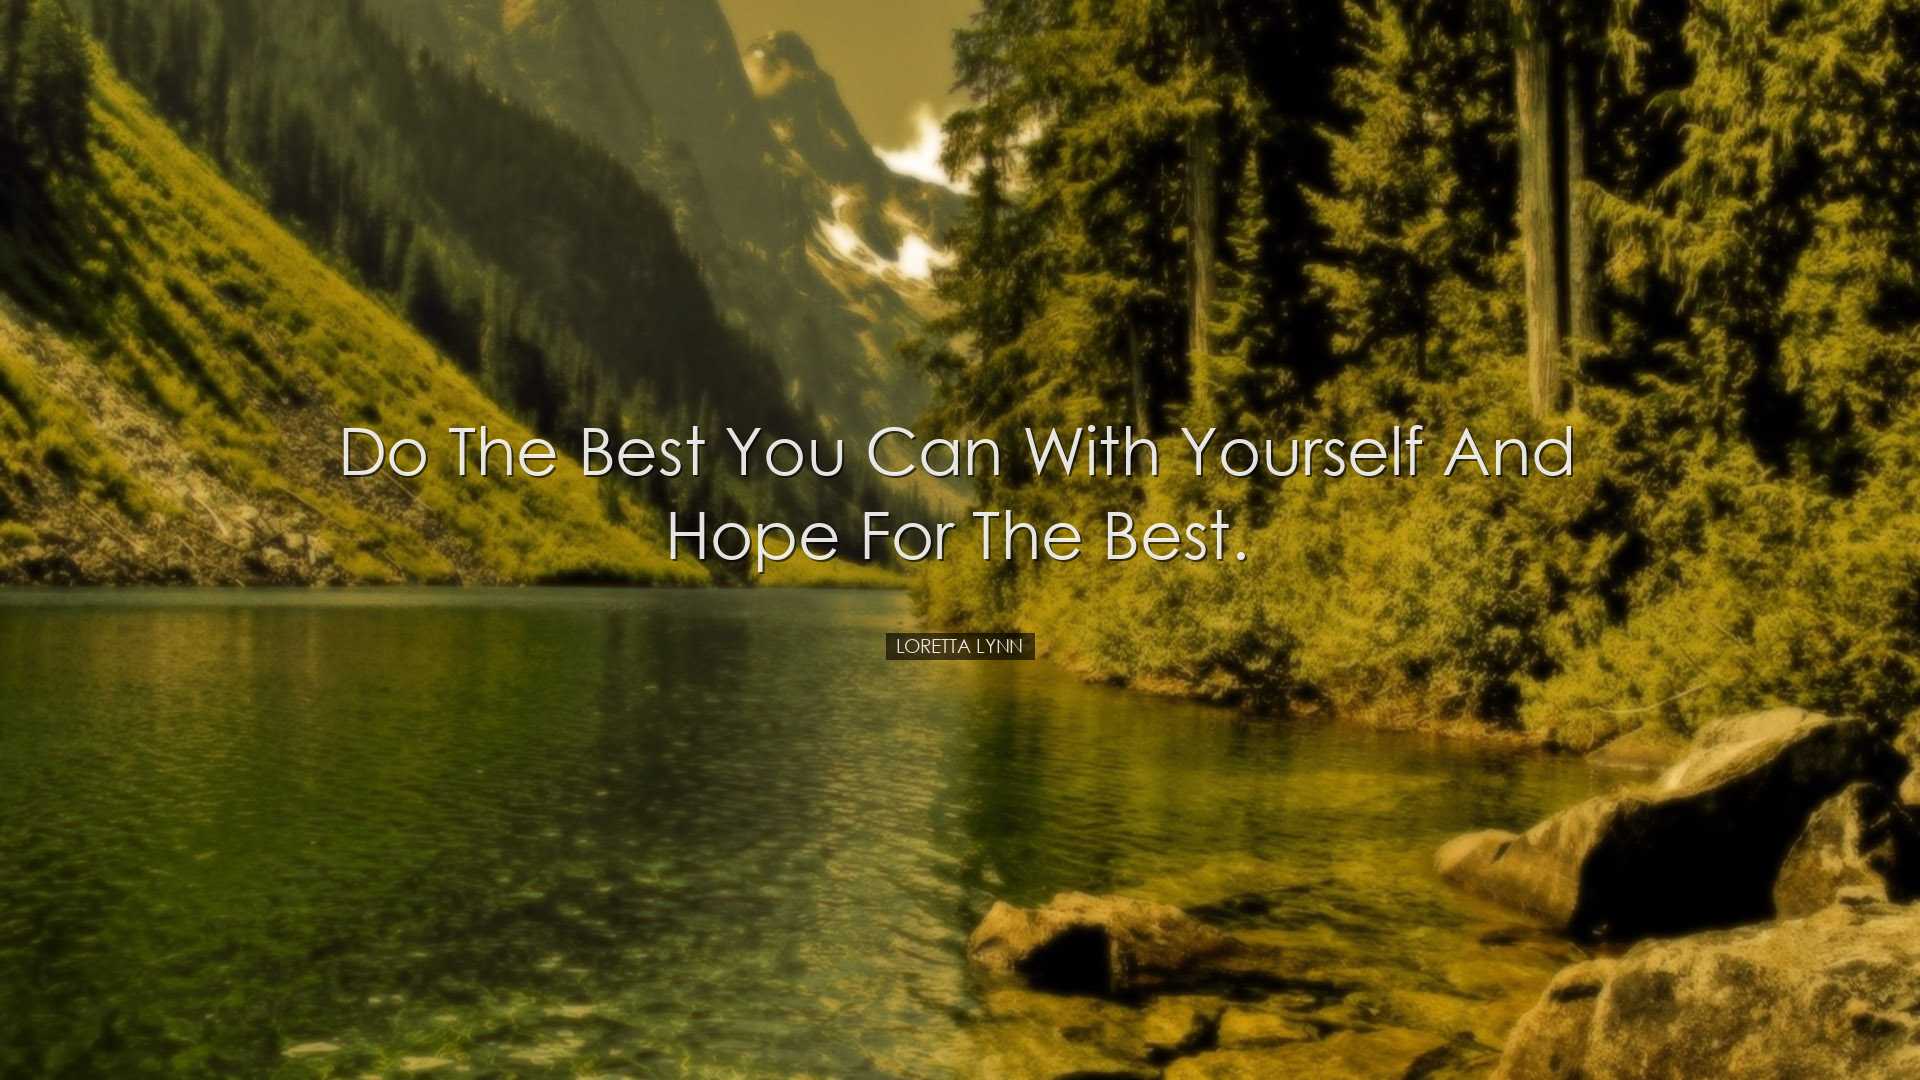 Do the best you can with yourself and hope for the best. - Loretta